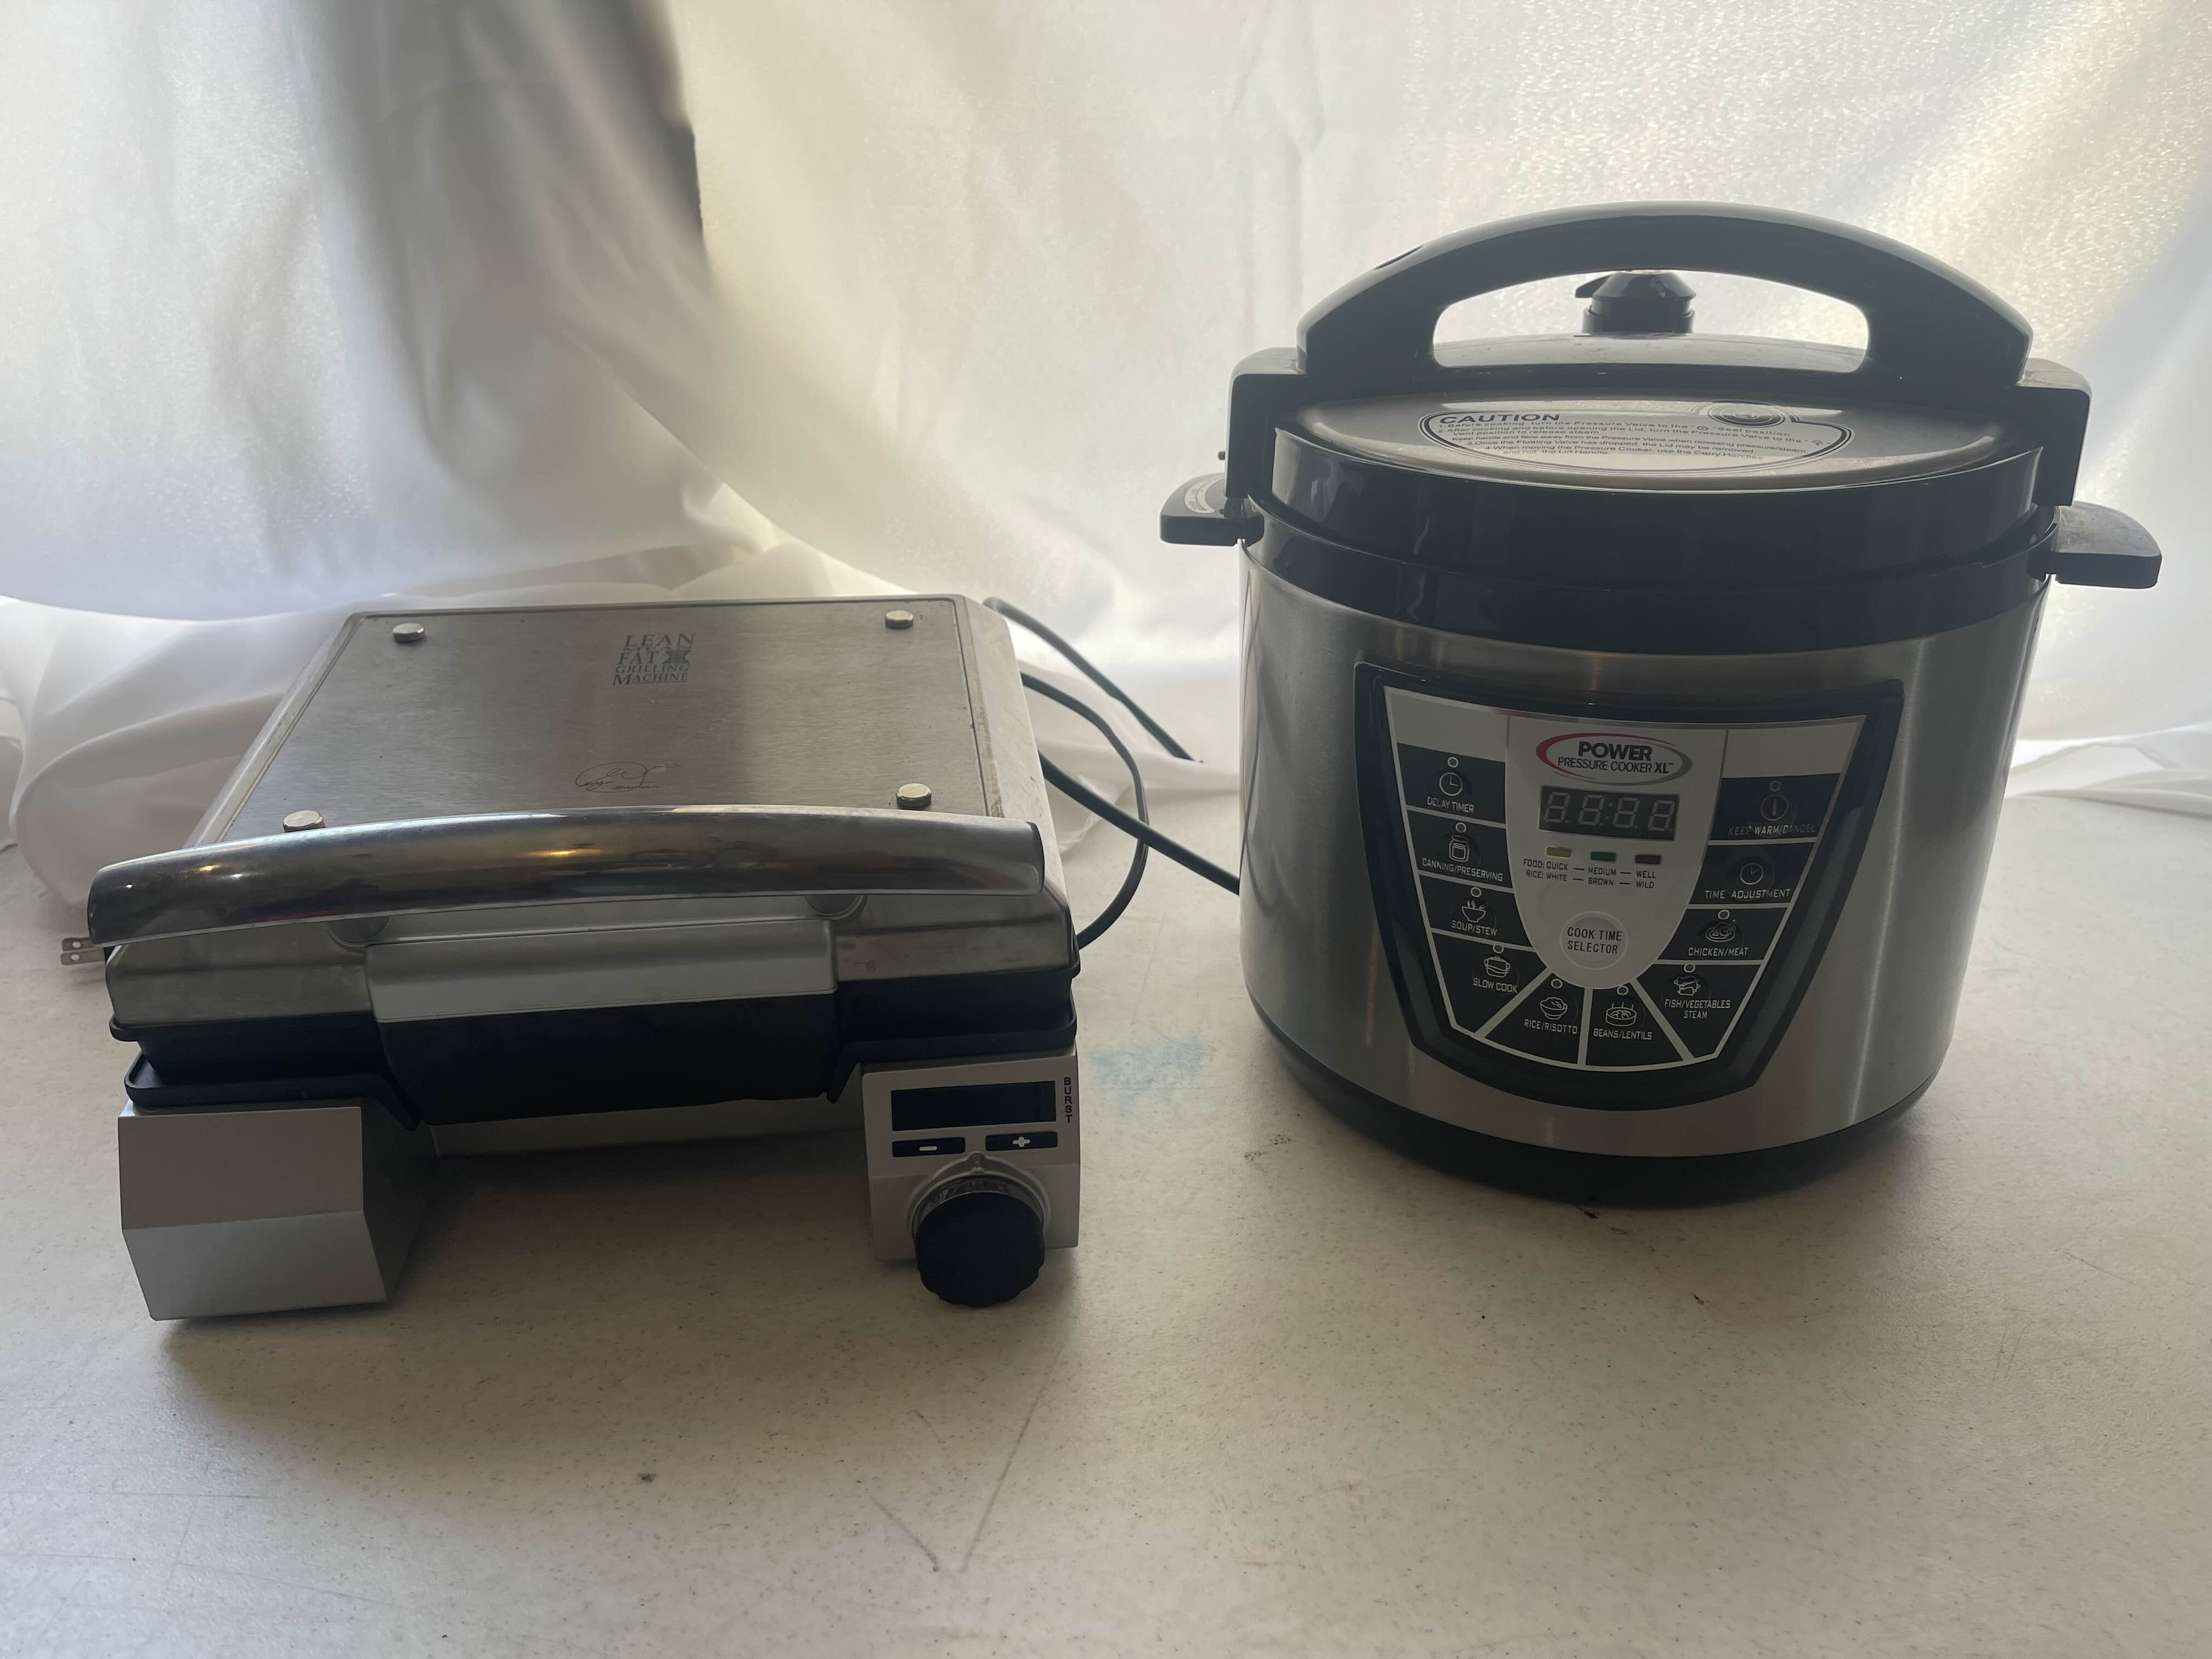 COOKING WITH THE POWER PRESSURE COOKER XL 10 QT 